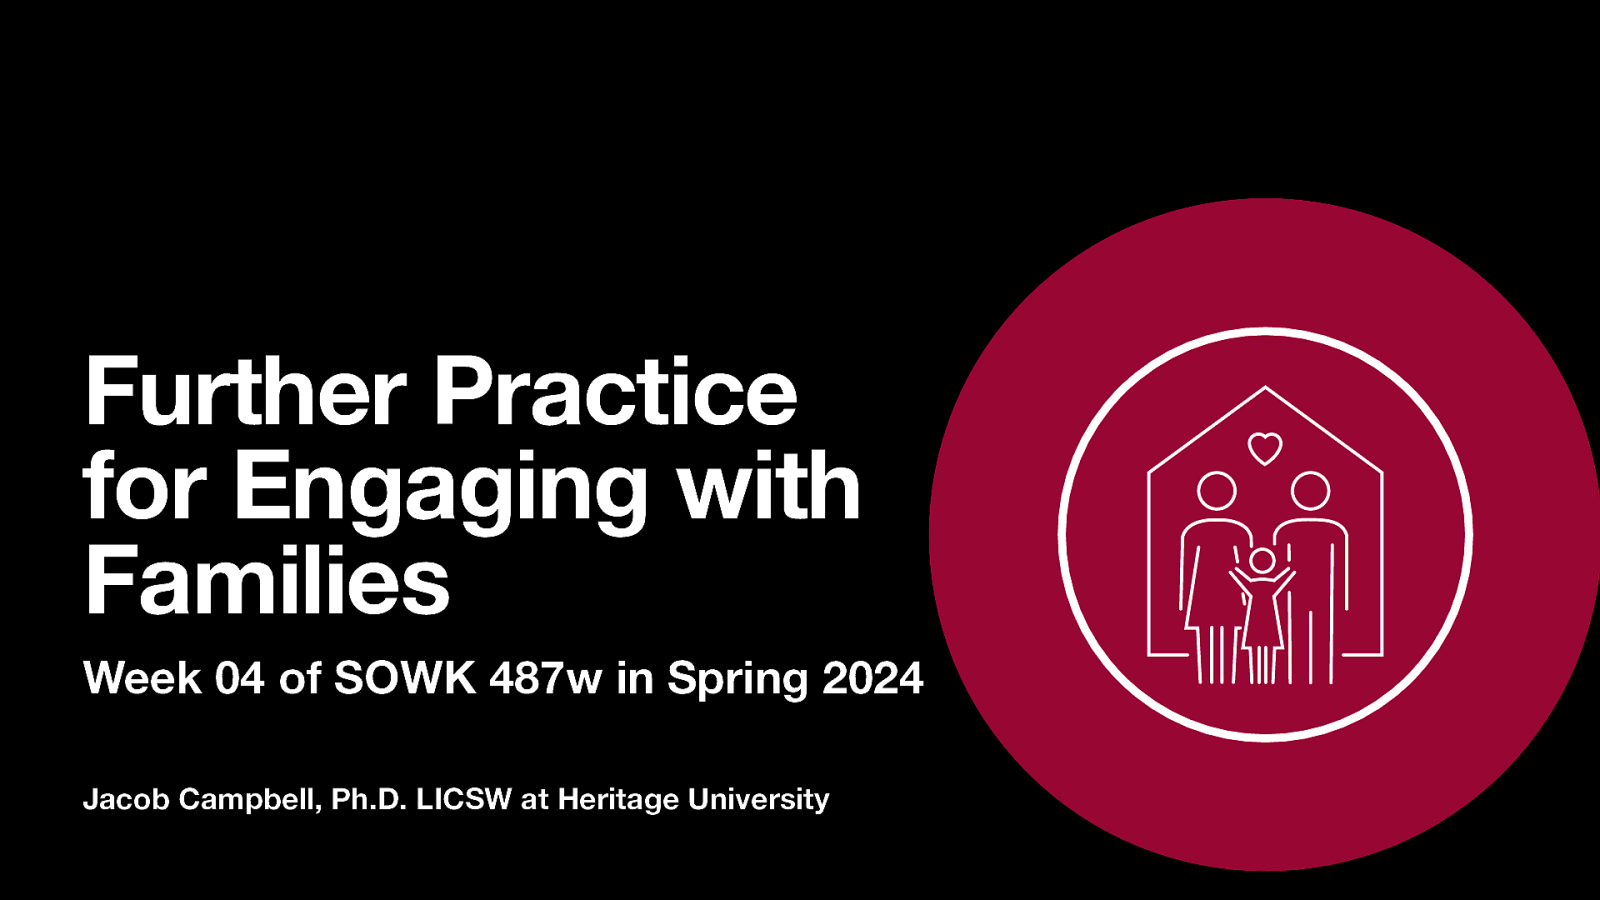 Spring 2024 SOWK 487w Week 04 - Further Practices for Engaging with Families